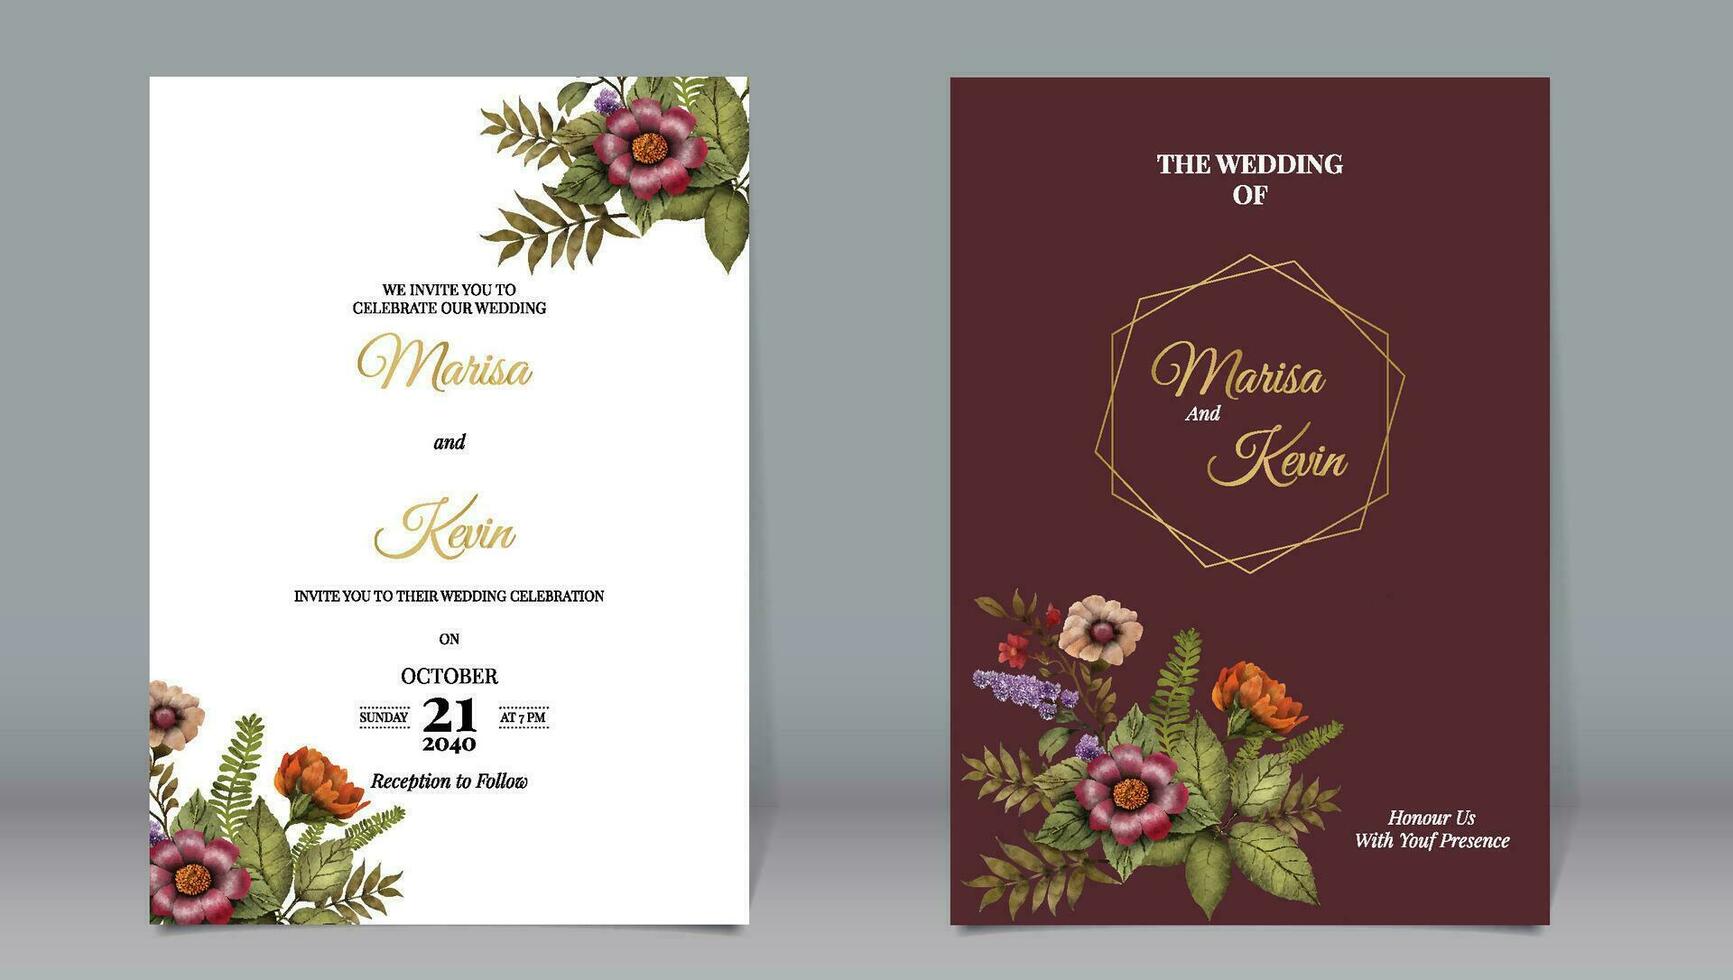 Luxury wedding invitation vintage botanical garden watercolor style flowers and leaves with simple background vector